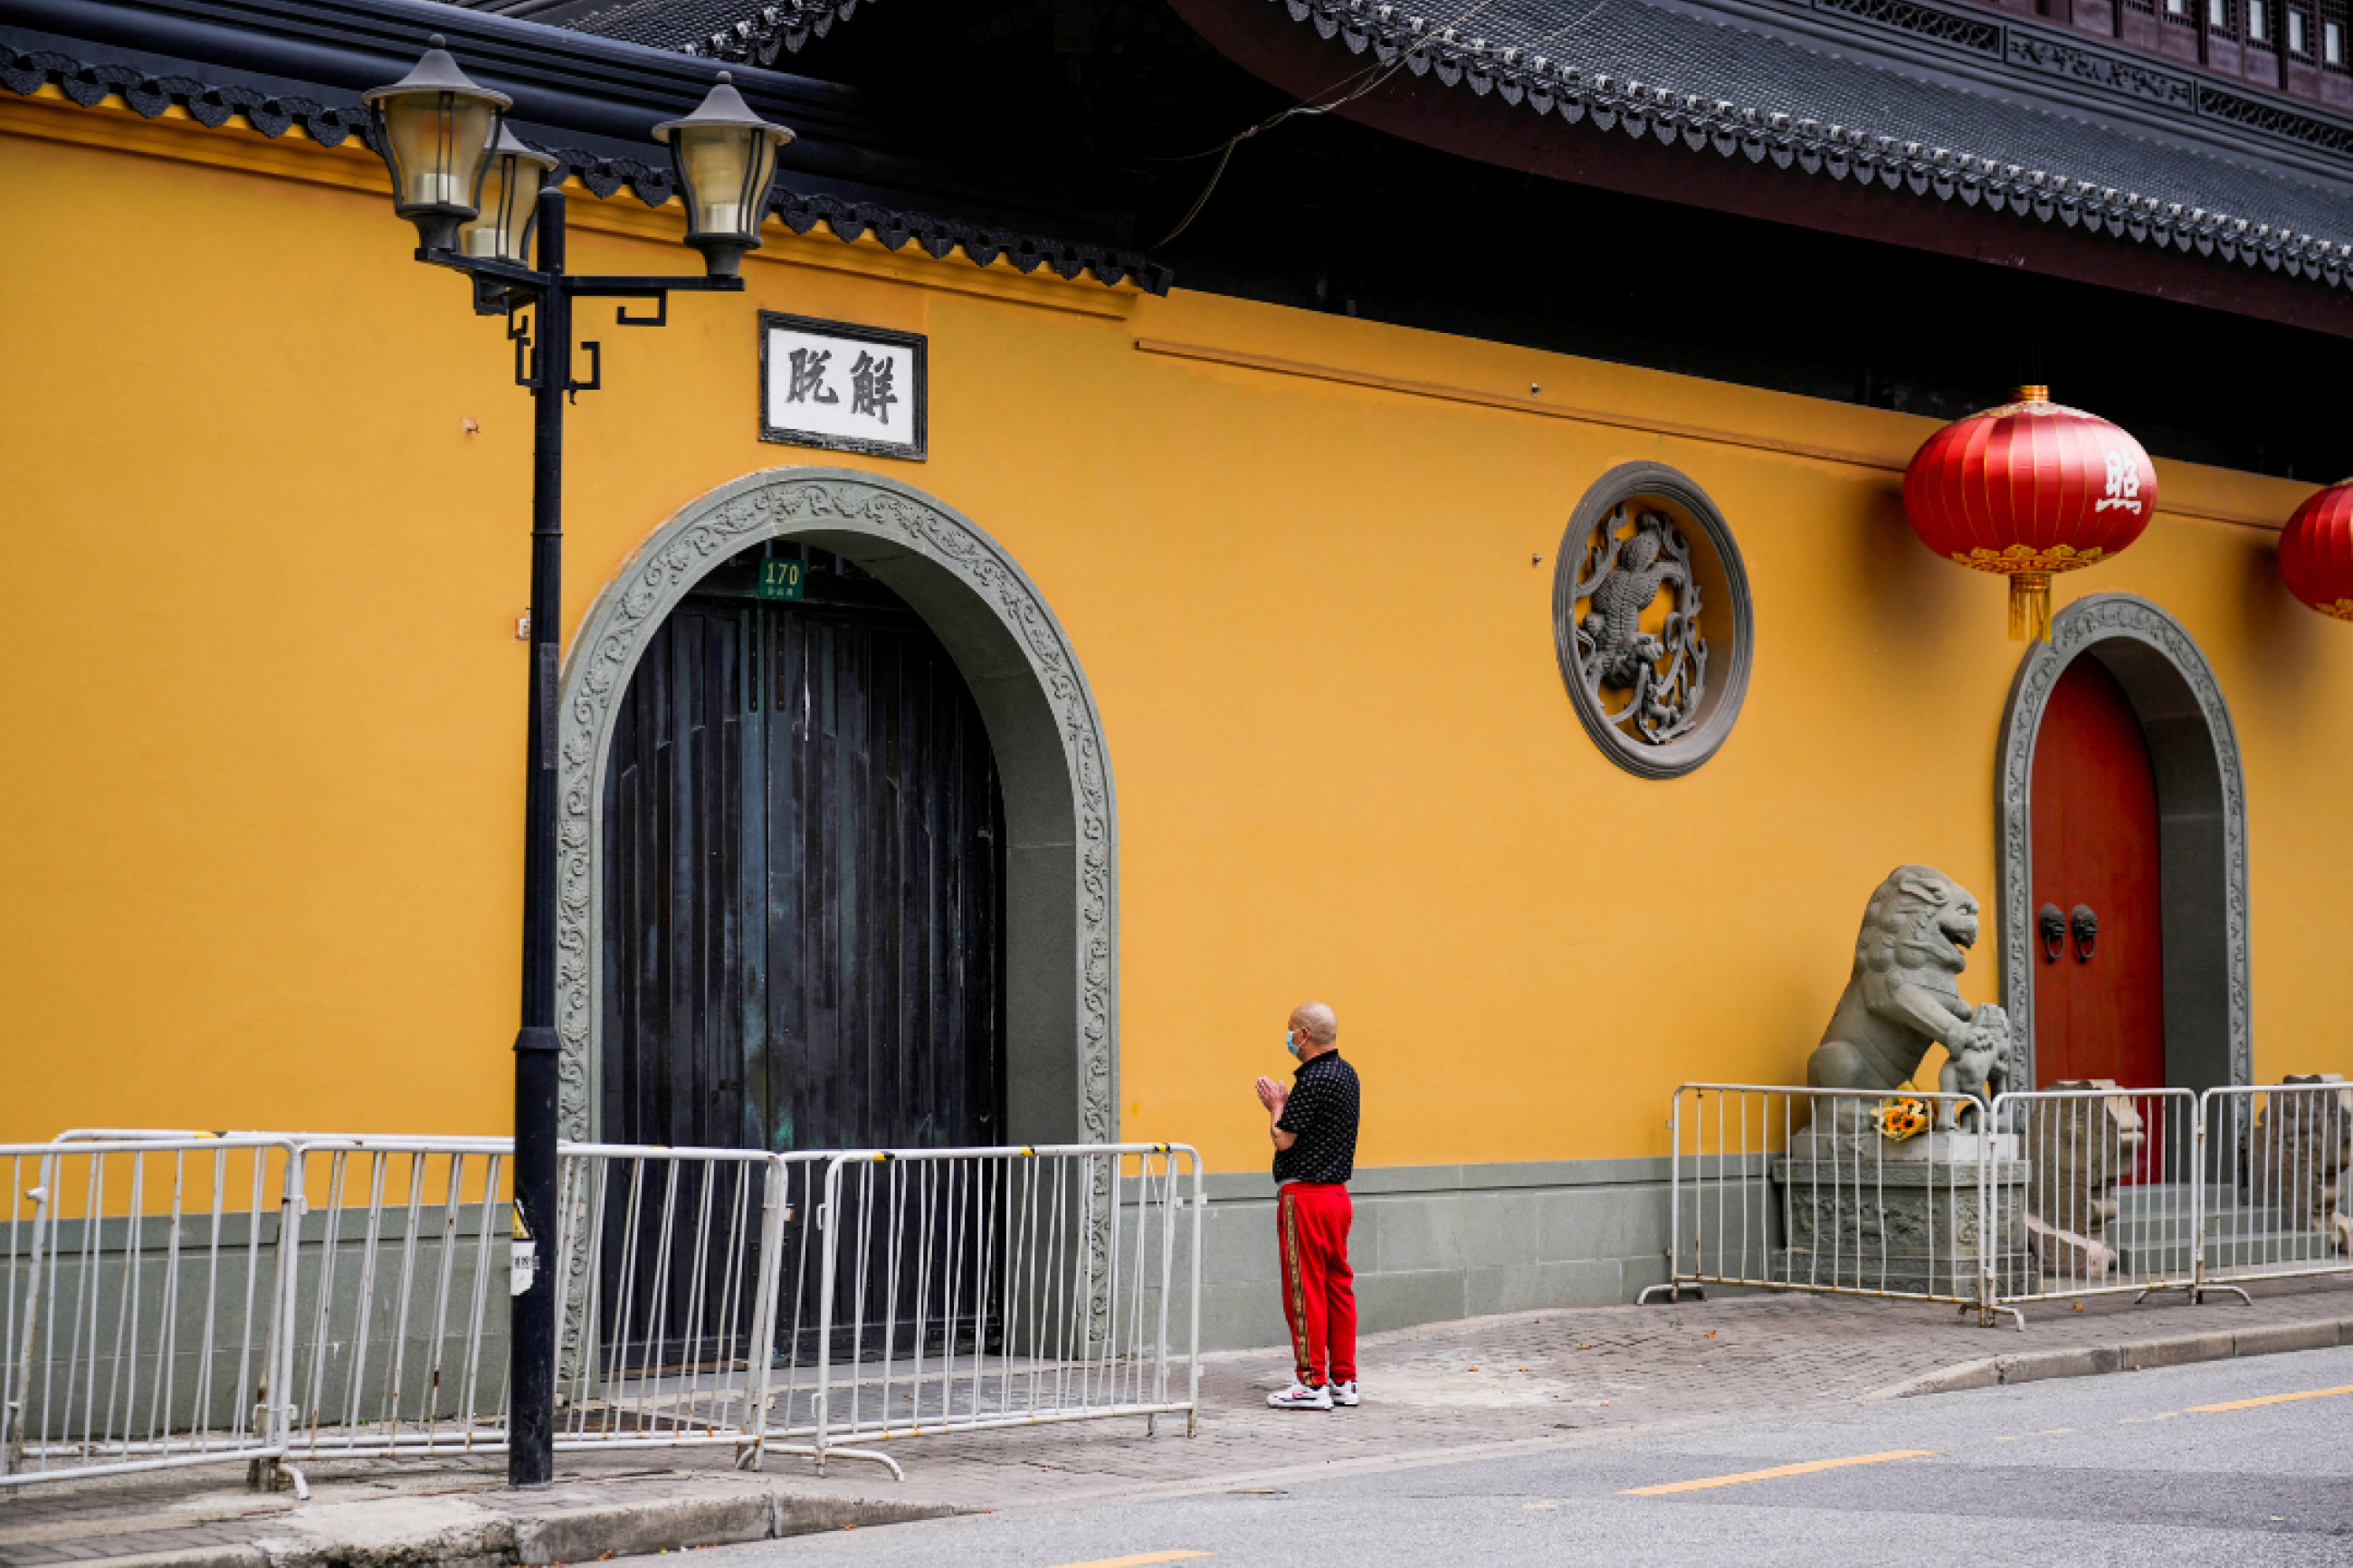 During a lockdown, a man in a mask, red pants, and a black shirt prays outside a bright orange temple that is closed due to a COVID-19 outbreak, in Shanghai, China, on May 30, 2022. in front of a temple